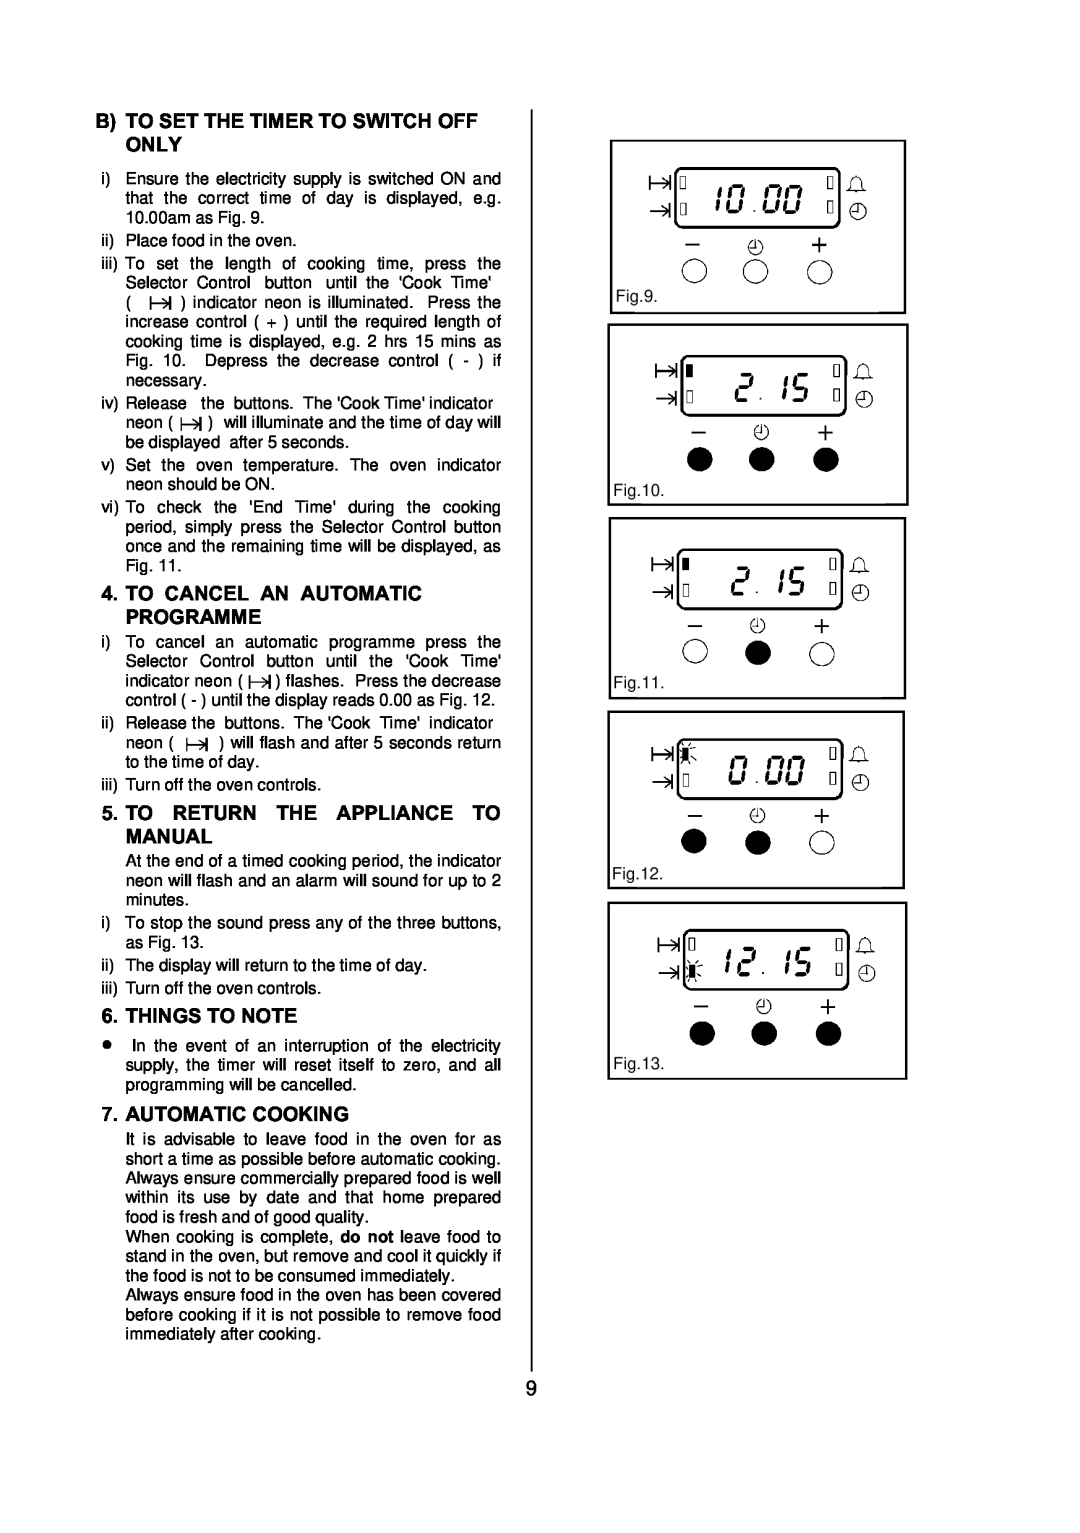 Electrolux D77000 user manual B To Set The Timer To Switch Off Only, To Cancel An Automatic Programme, Things To Note 